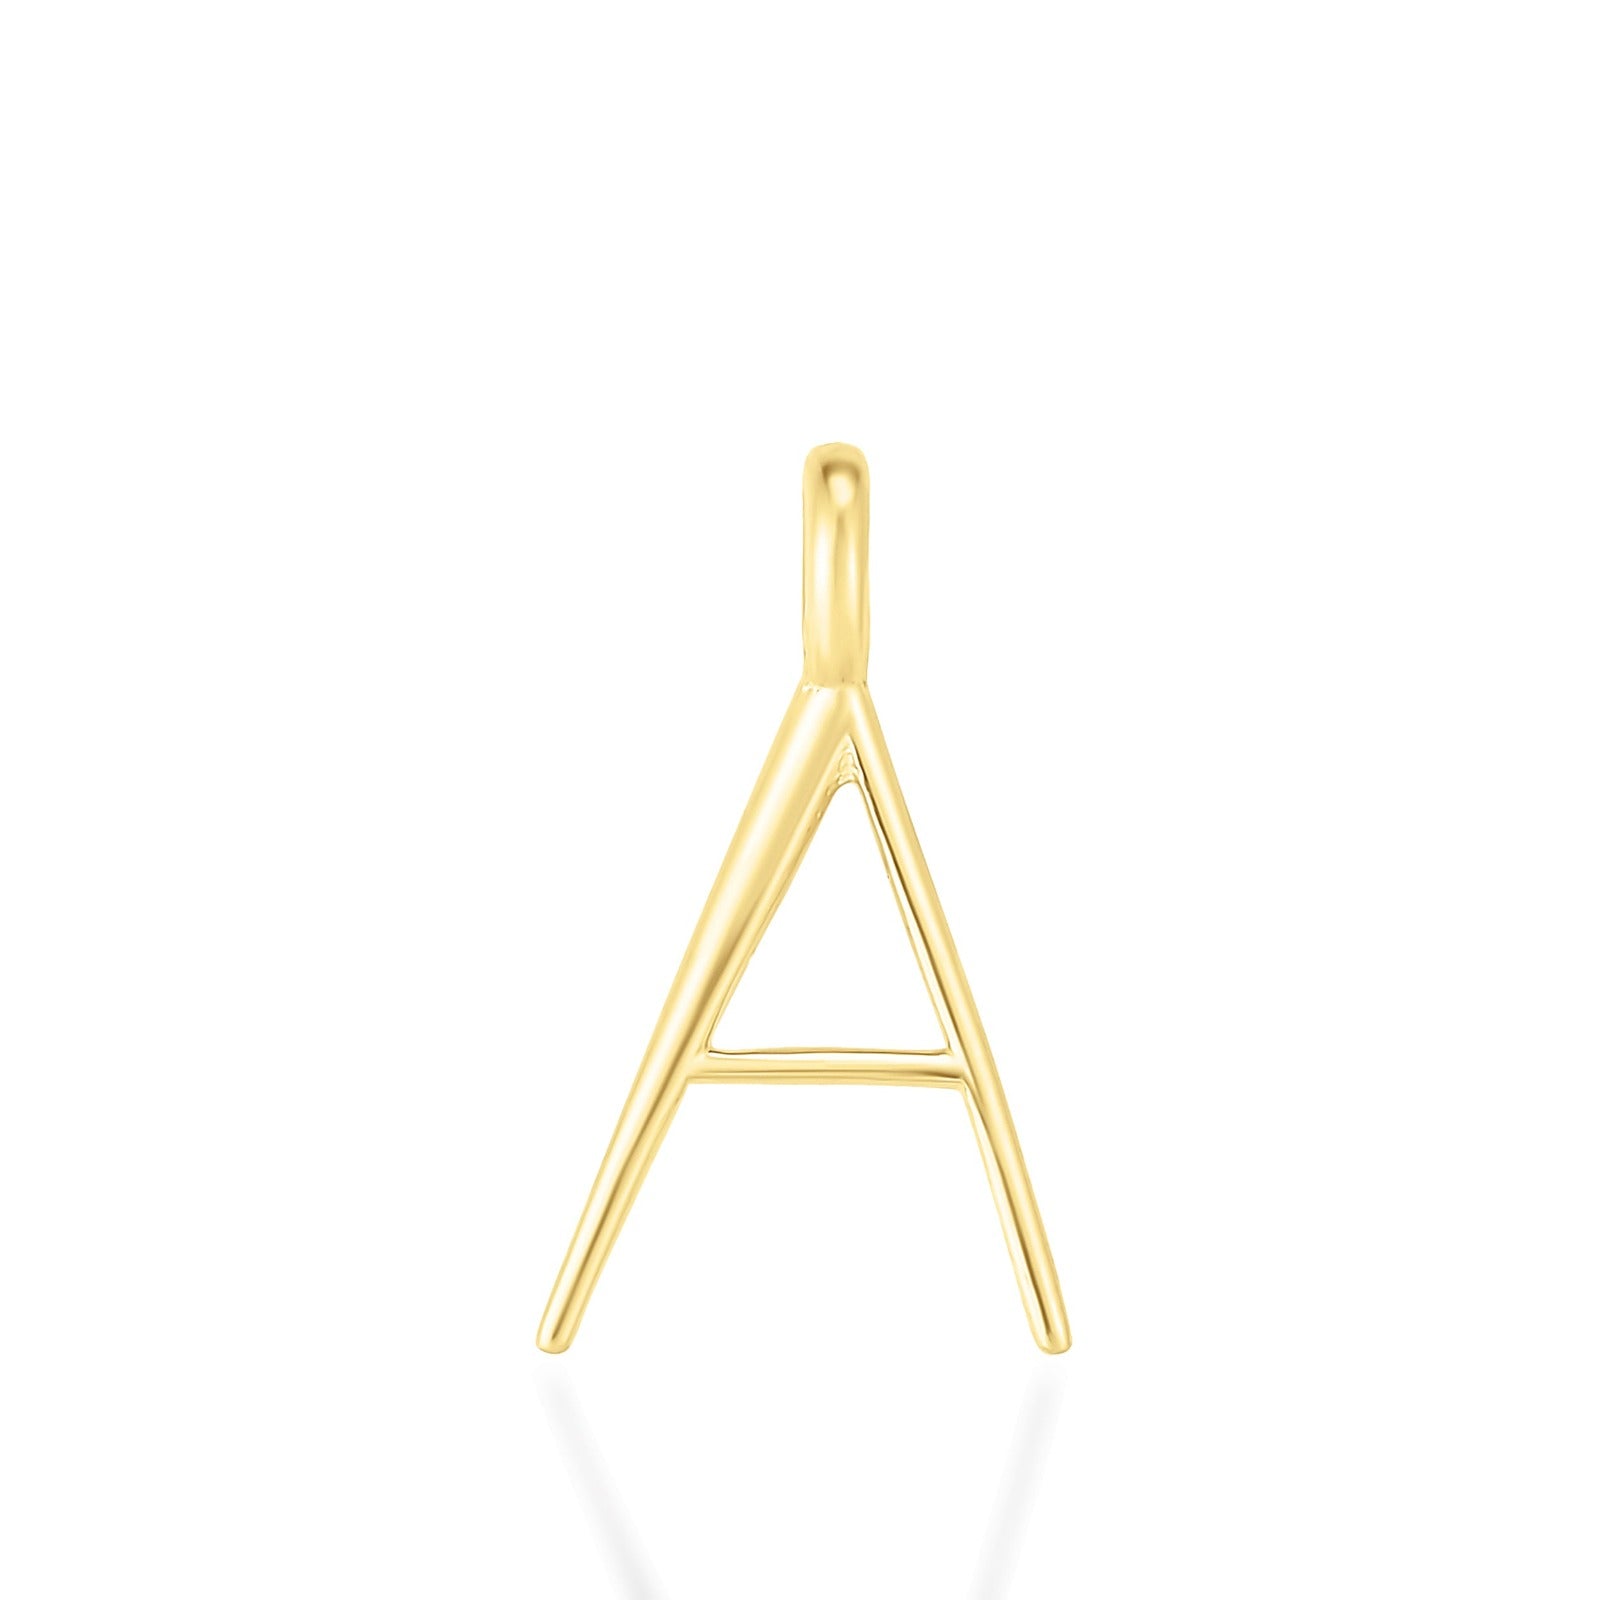 14K yellow gold A letter charm. 